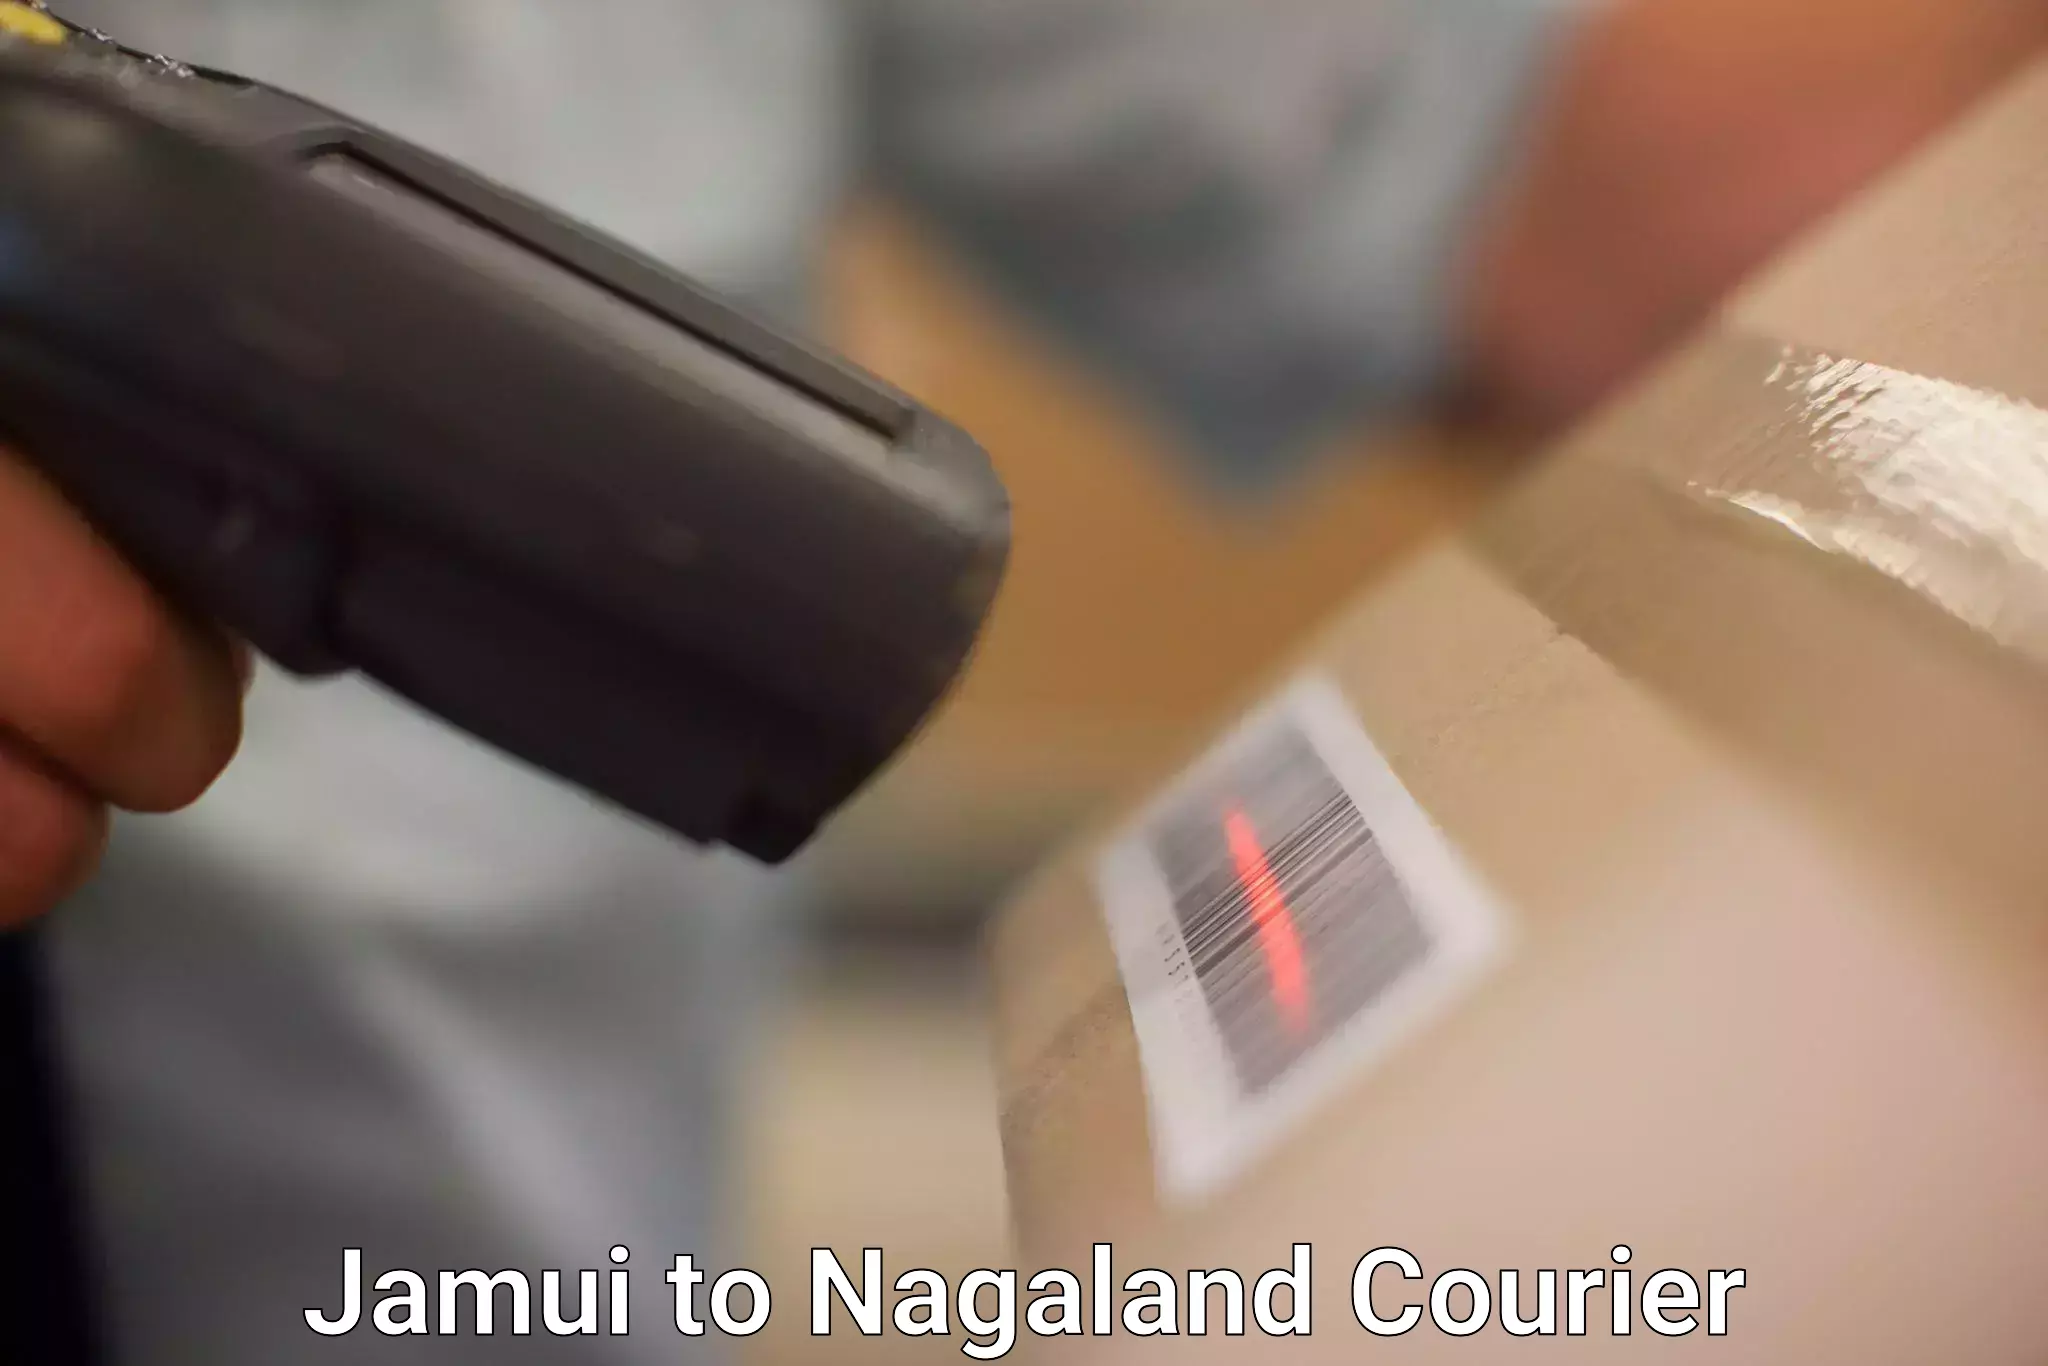 Cargo delivery service Jamui to Nagaland